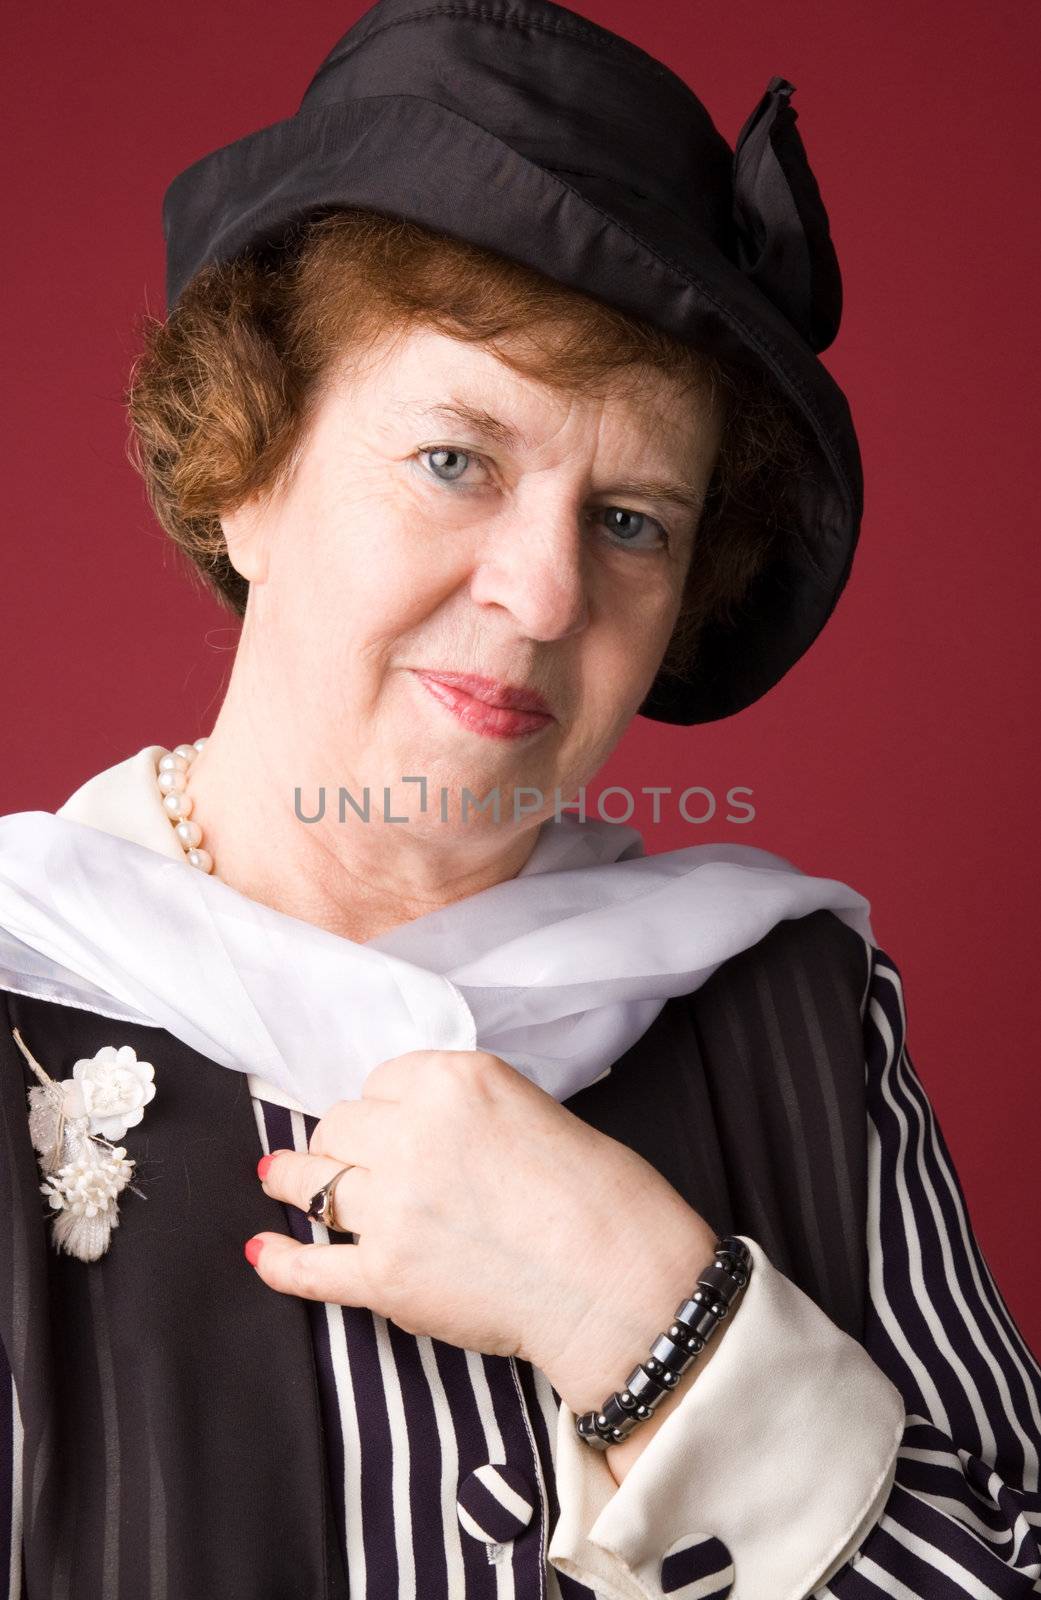 The elderly woman in a hat on a red background.